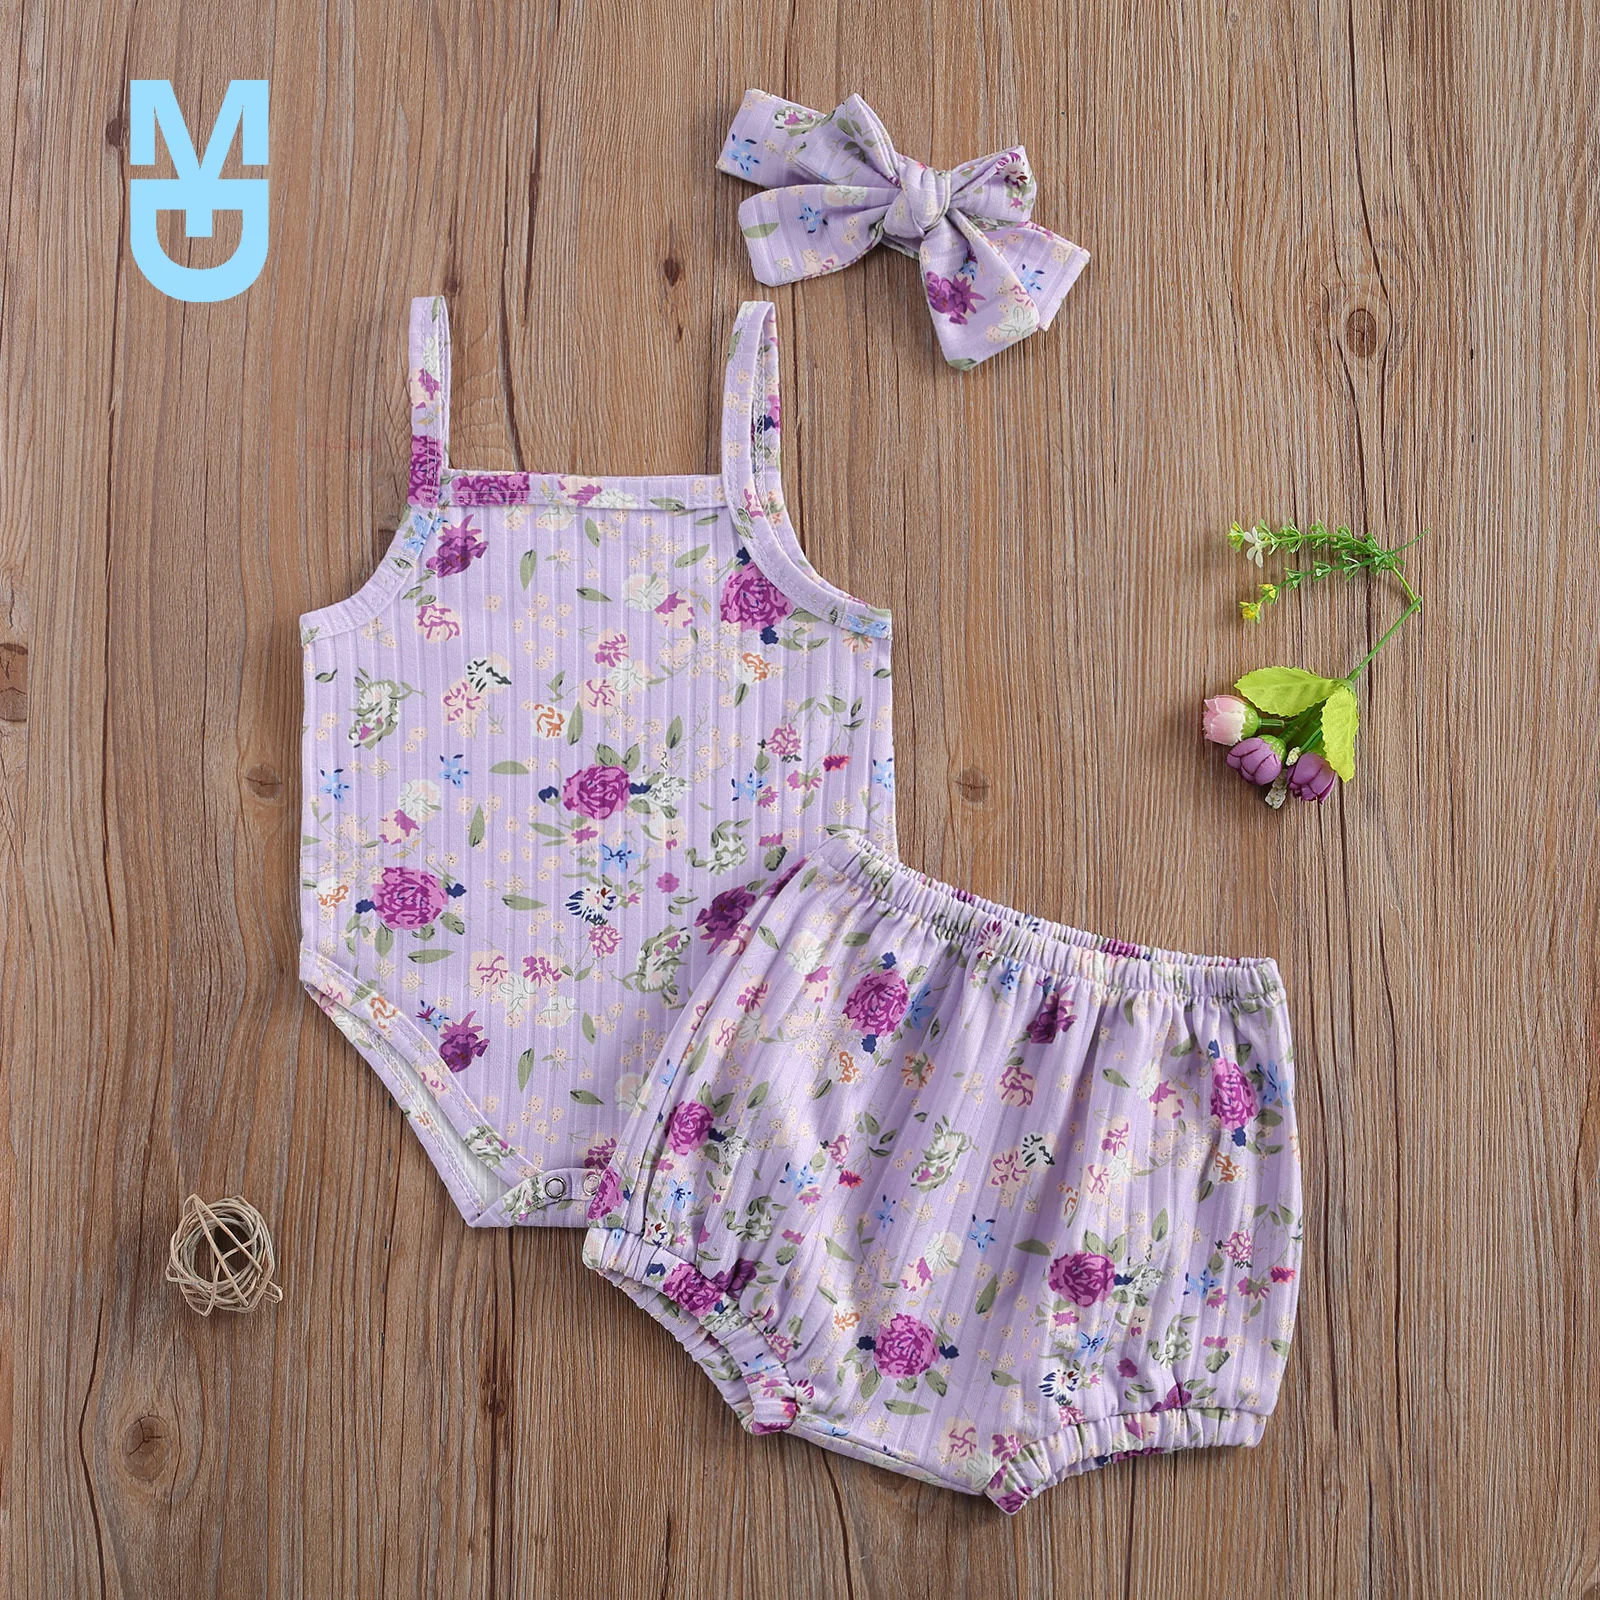 

New 0-24M born Toddler 3Pcs Clothing Set Infant Baby Girl Sleevelss Romper Top Floral Printed Shorts Headband Suit